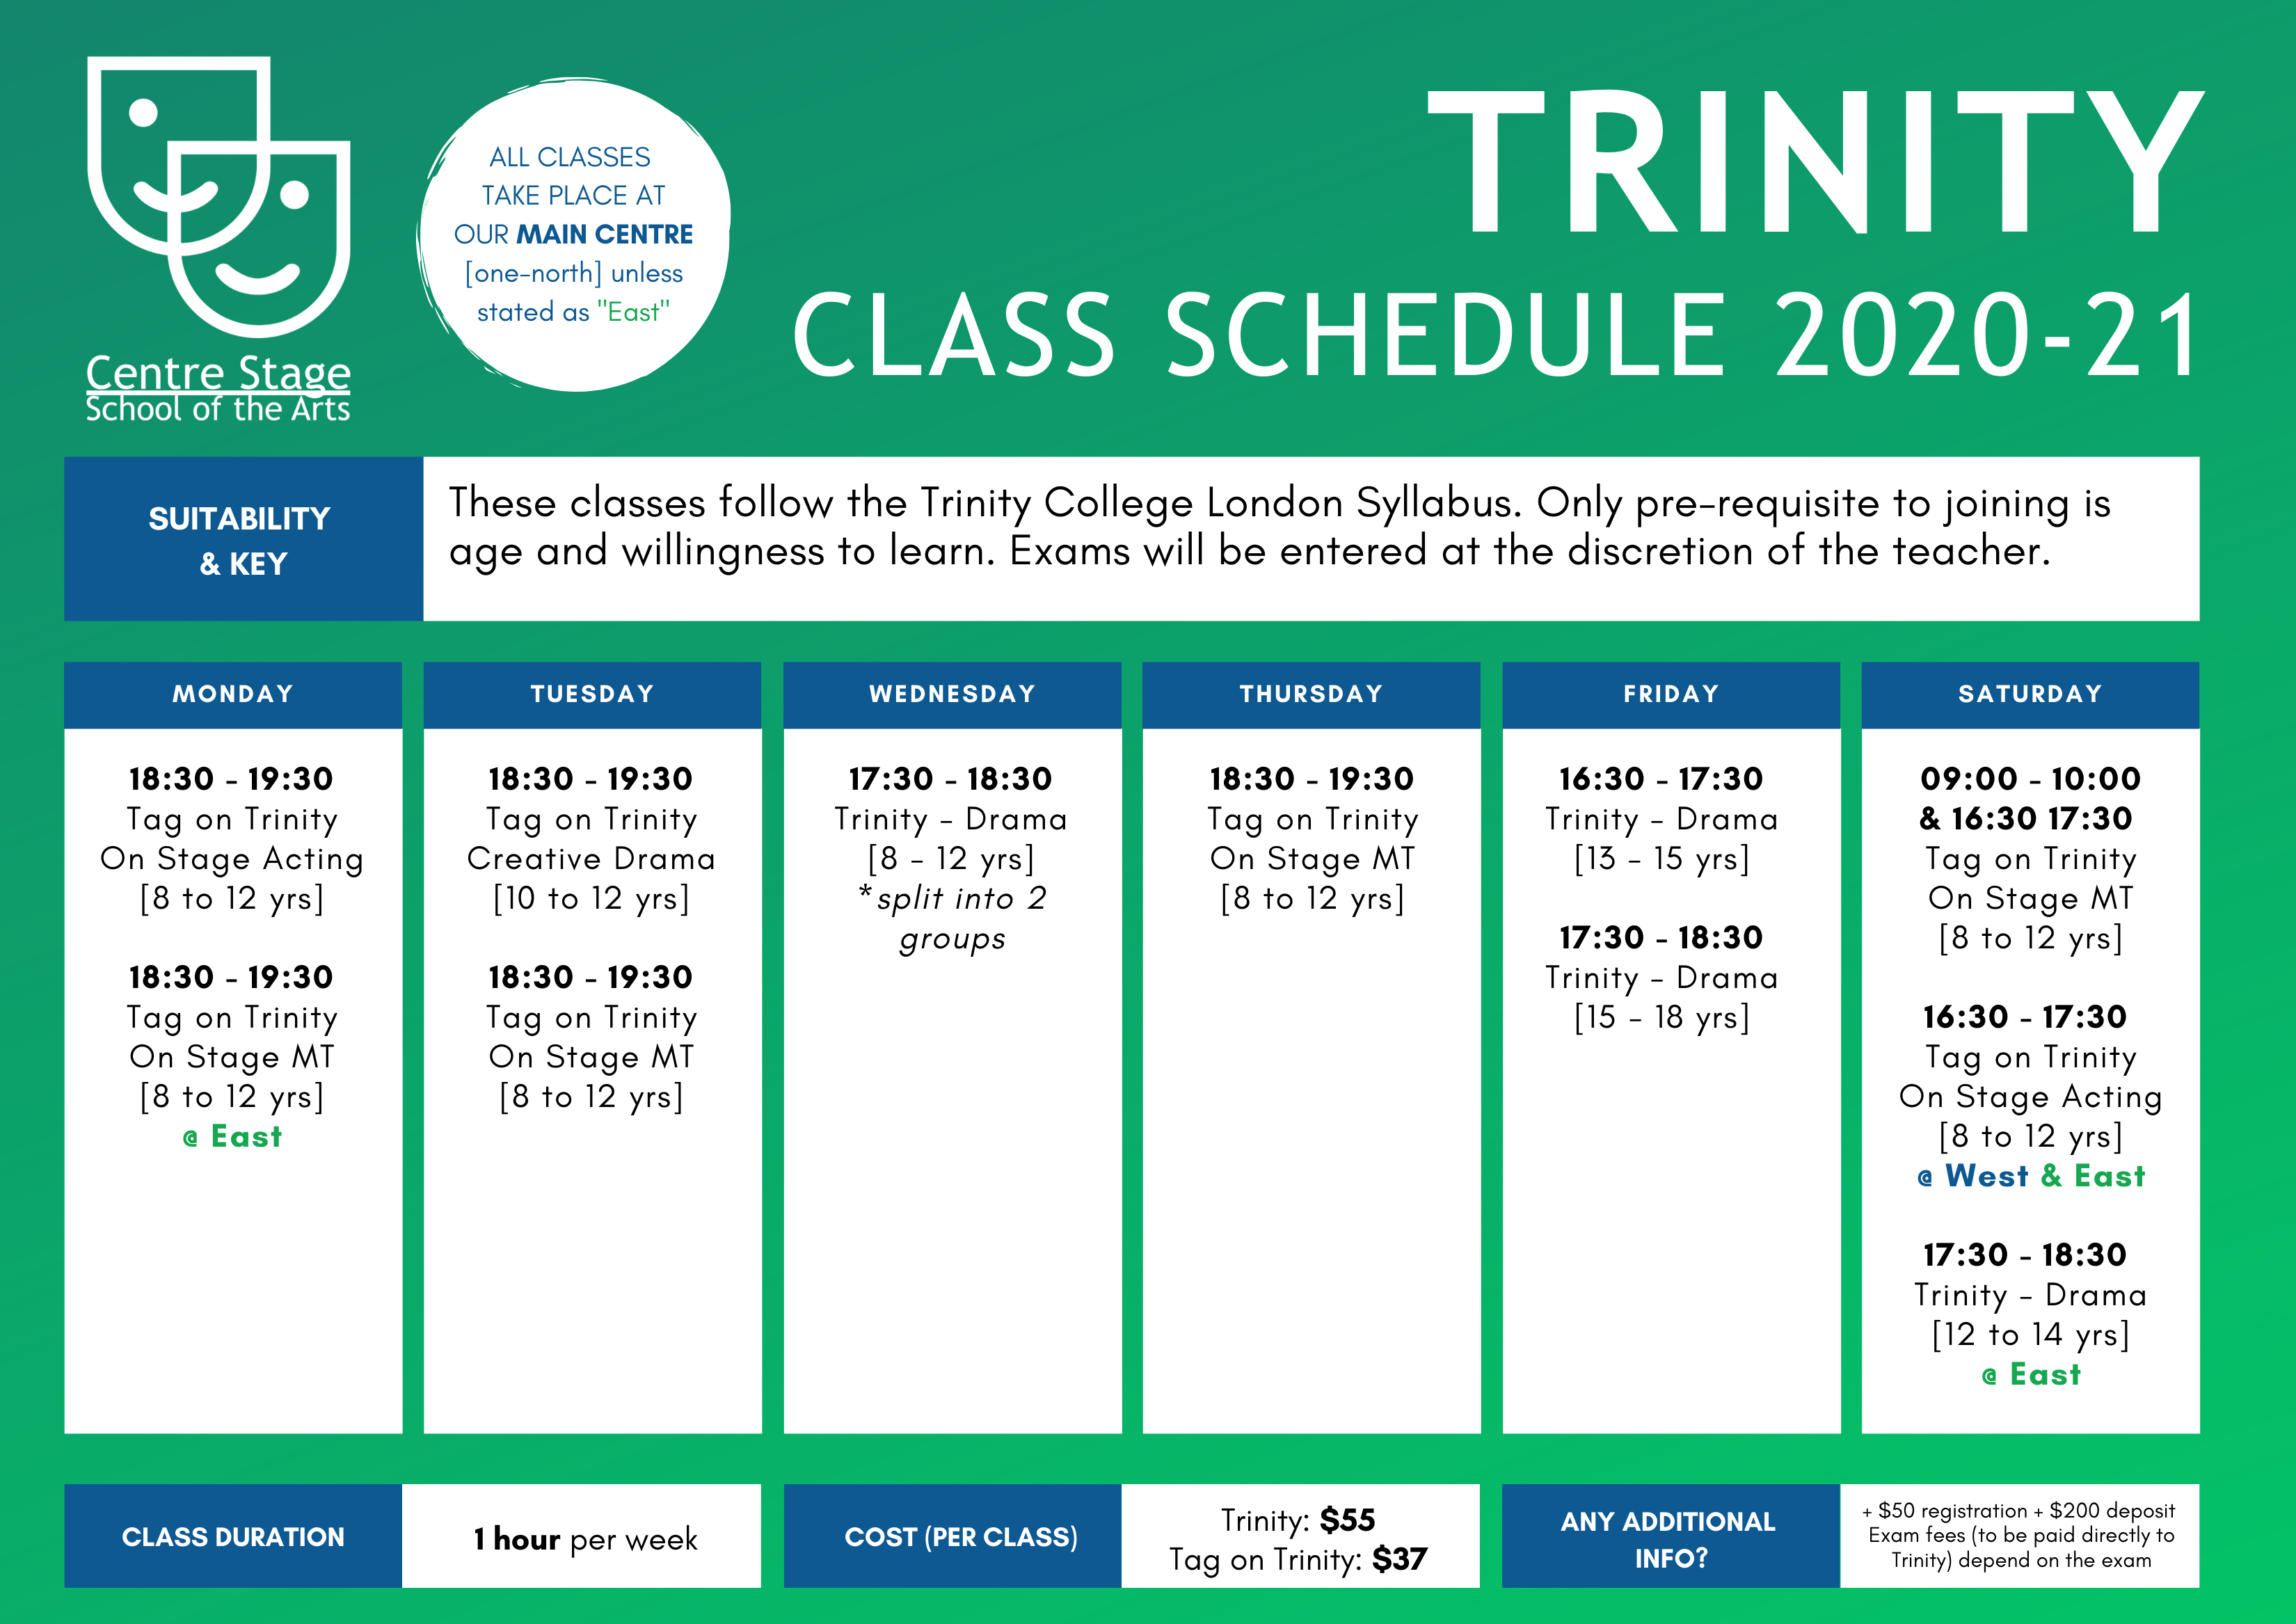 Trinity Class Schedules 2020-21 | Centre Stage